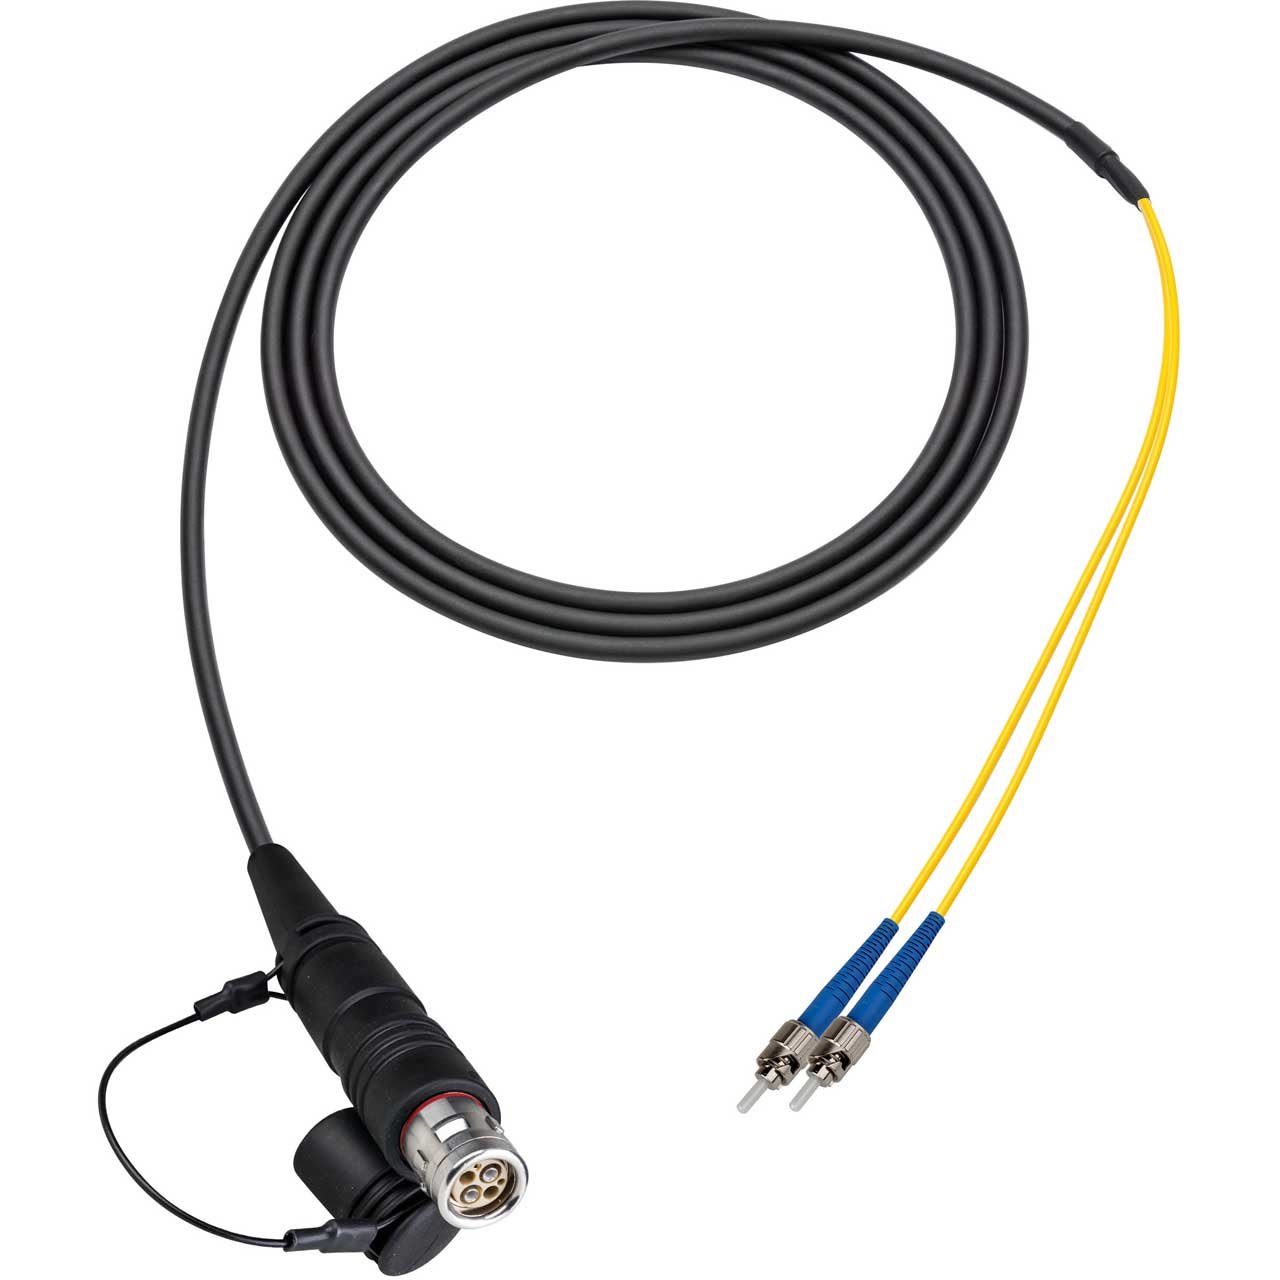 HF-FUWST-BO-06 Camplex LEMO FUW to Dual ST In-Line Fiber Optic Breakout Cable